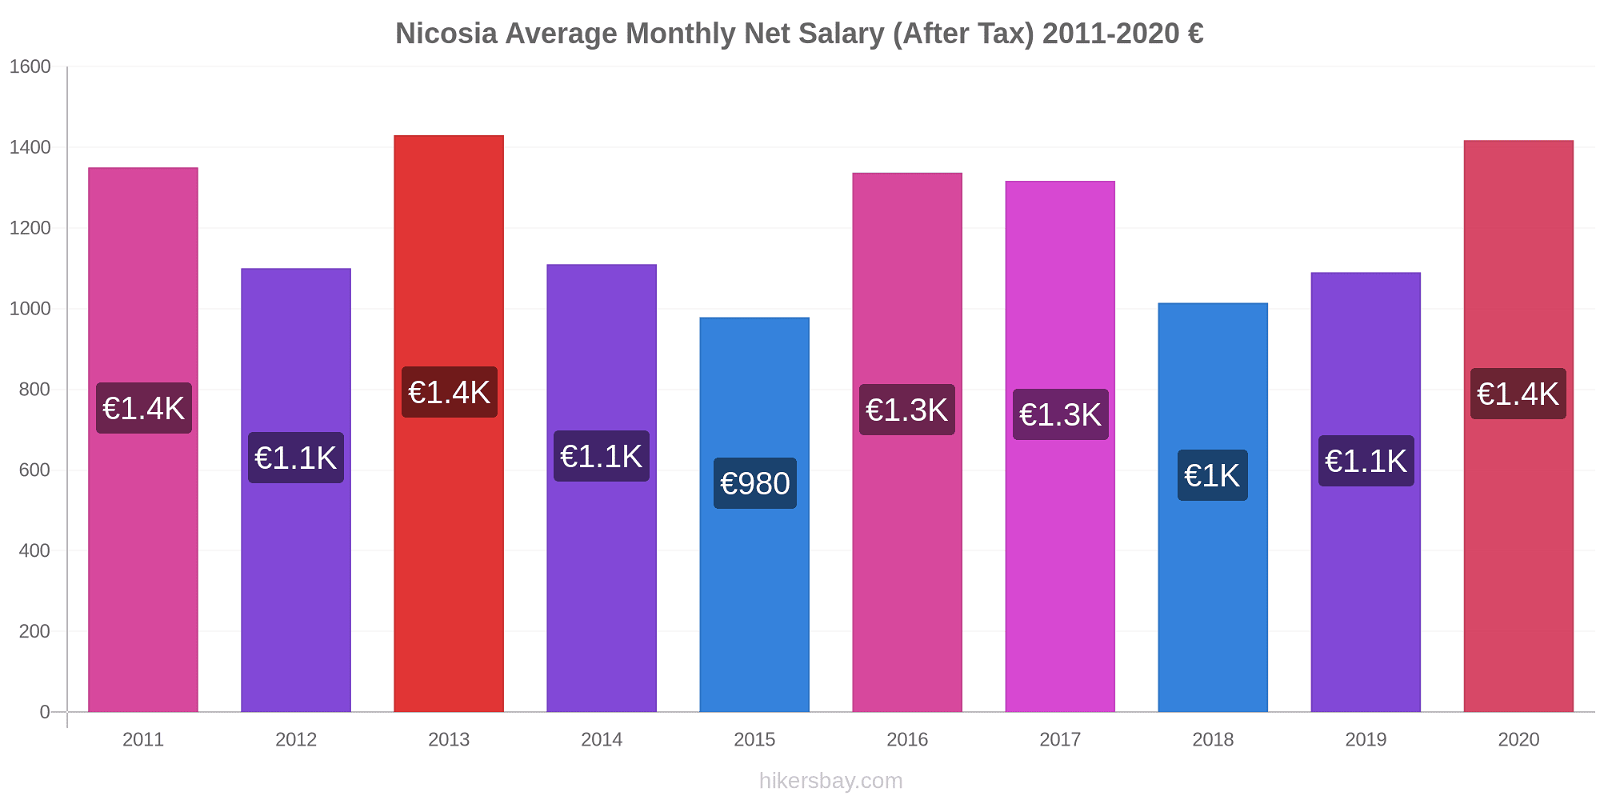 Nicosia price changes Average Monthly Net Salary (After Tax) hikersbay.com